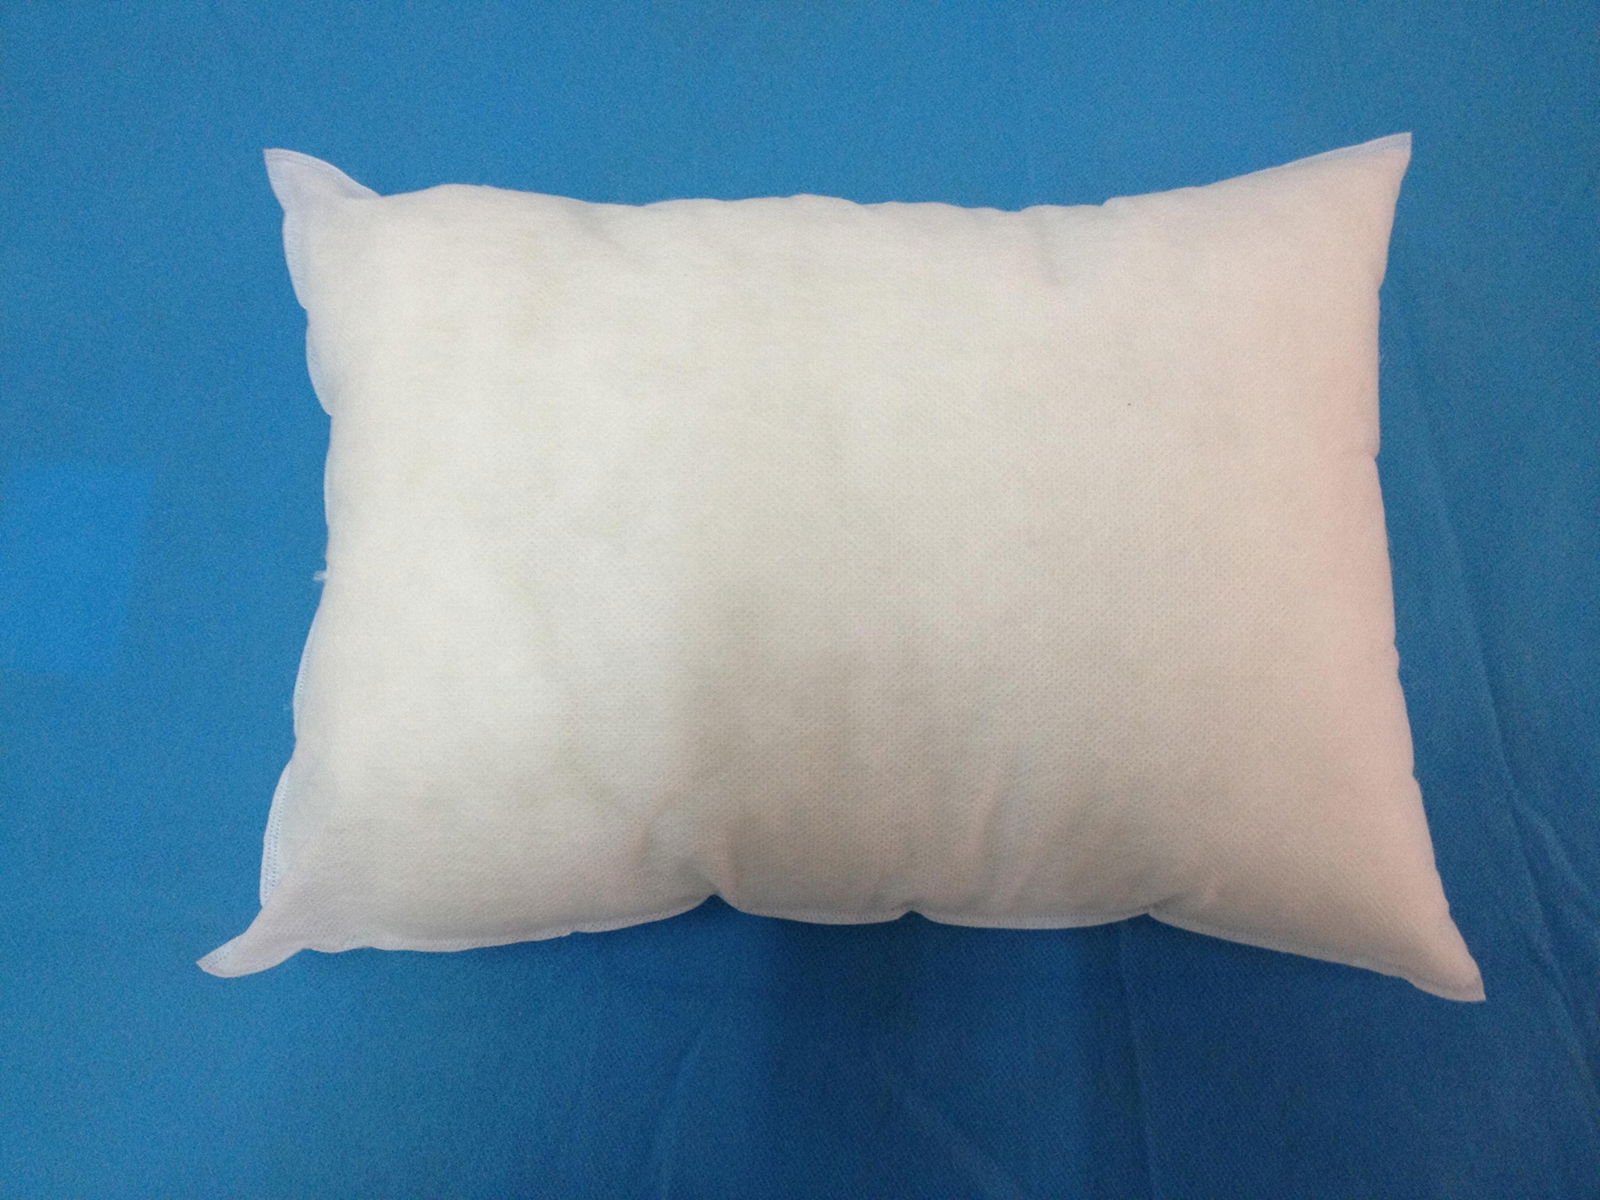 Disposable airline pillow 2